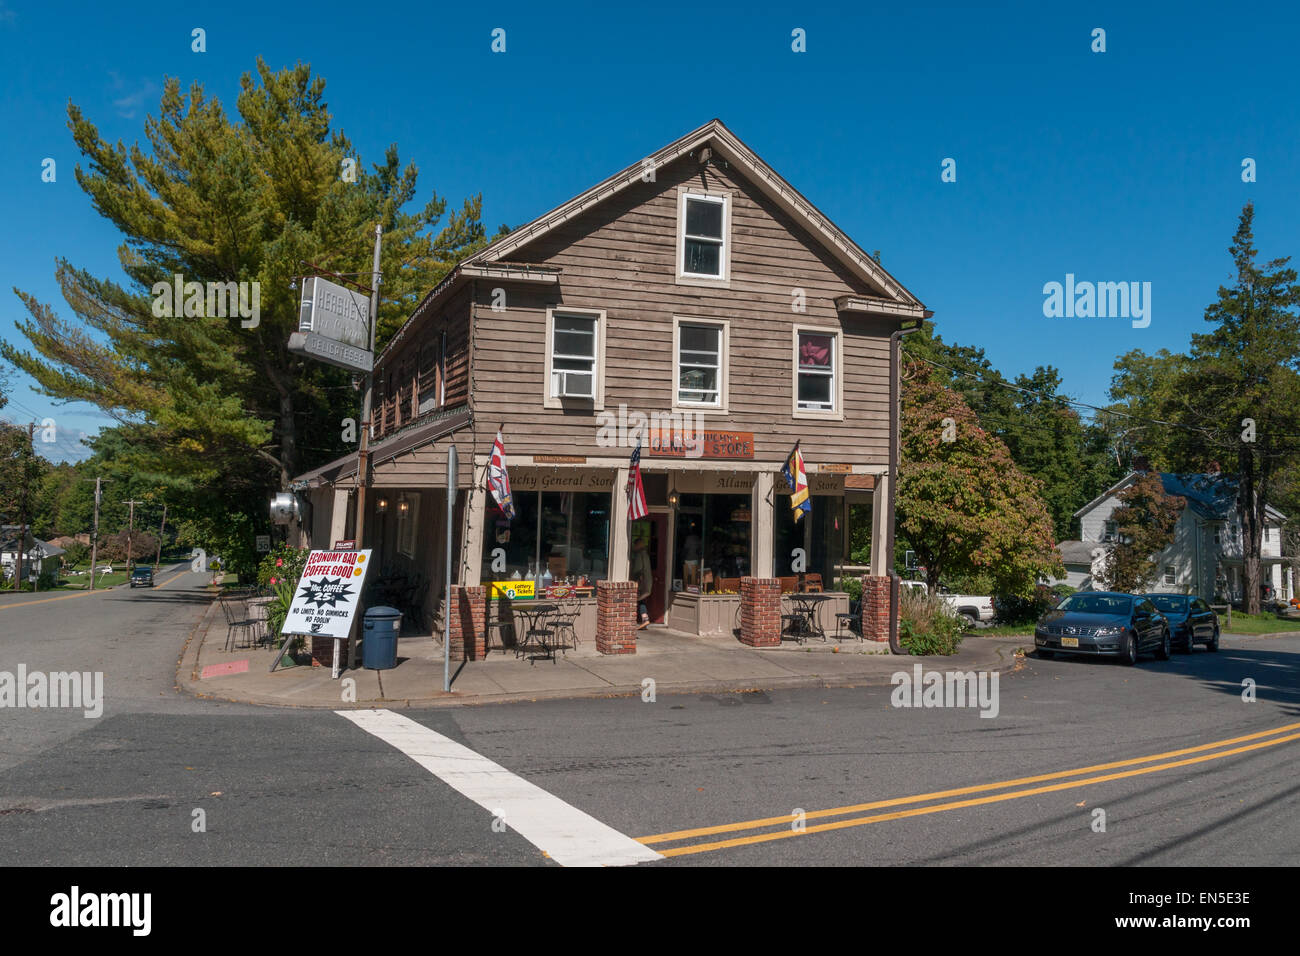 Allamuchy General Store New Jersey USA a typical old fashioned small town general store and deli Stock Photo